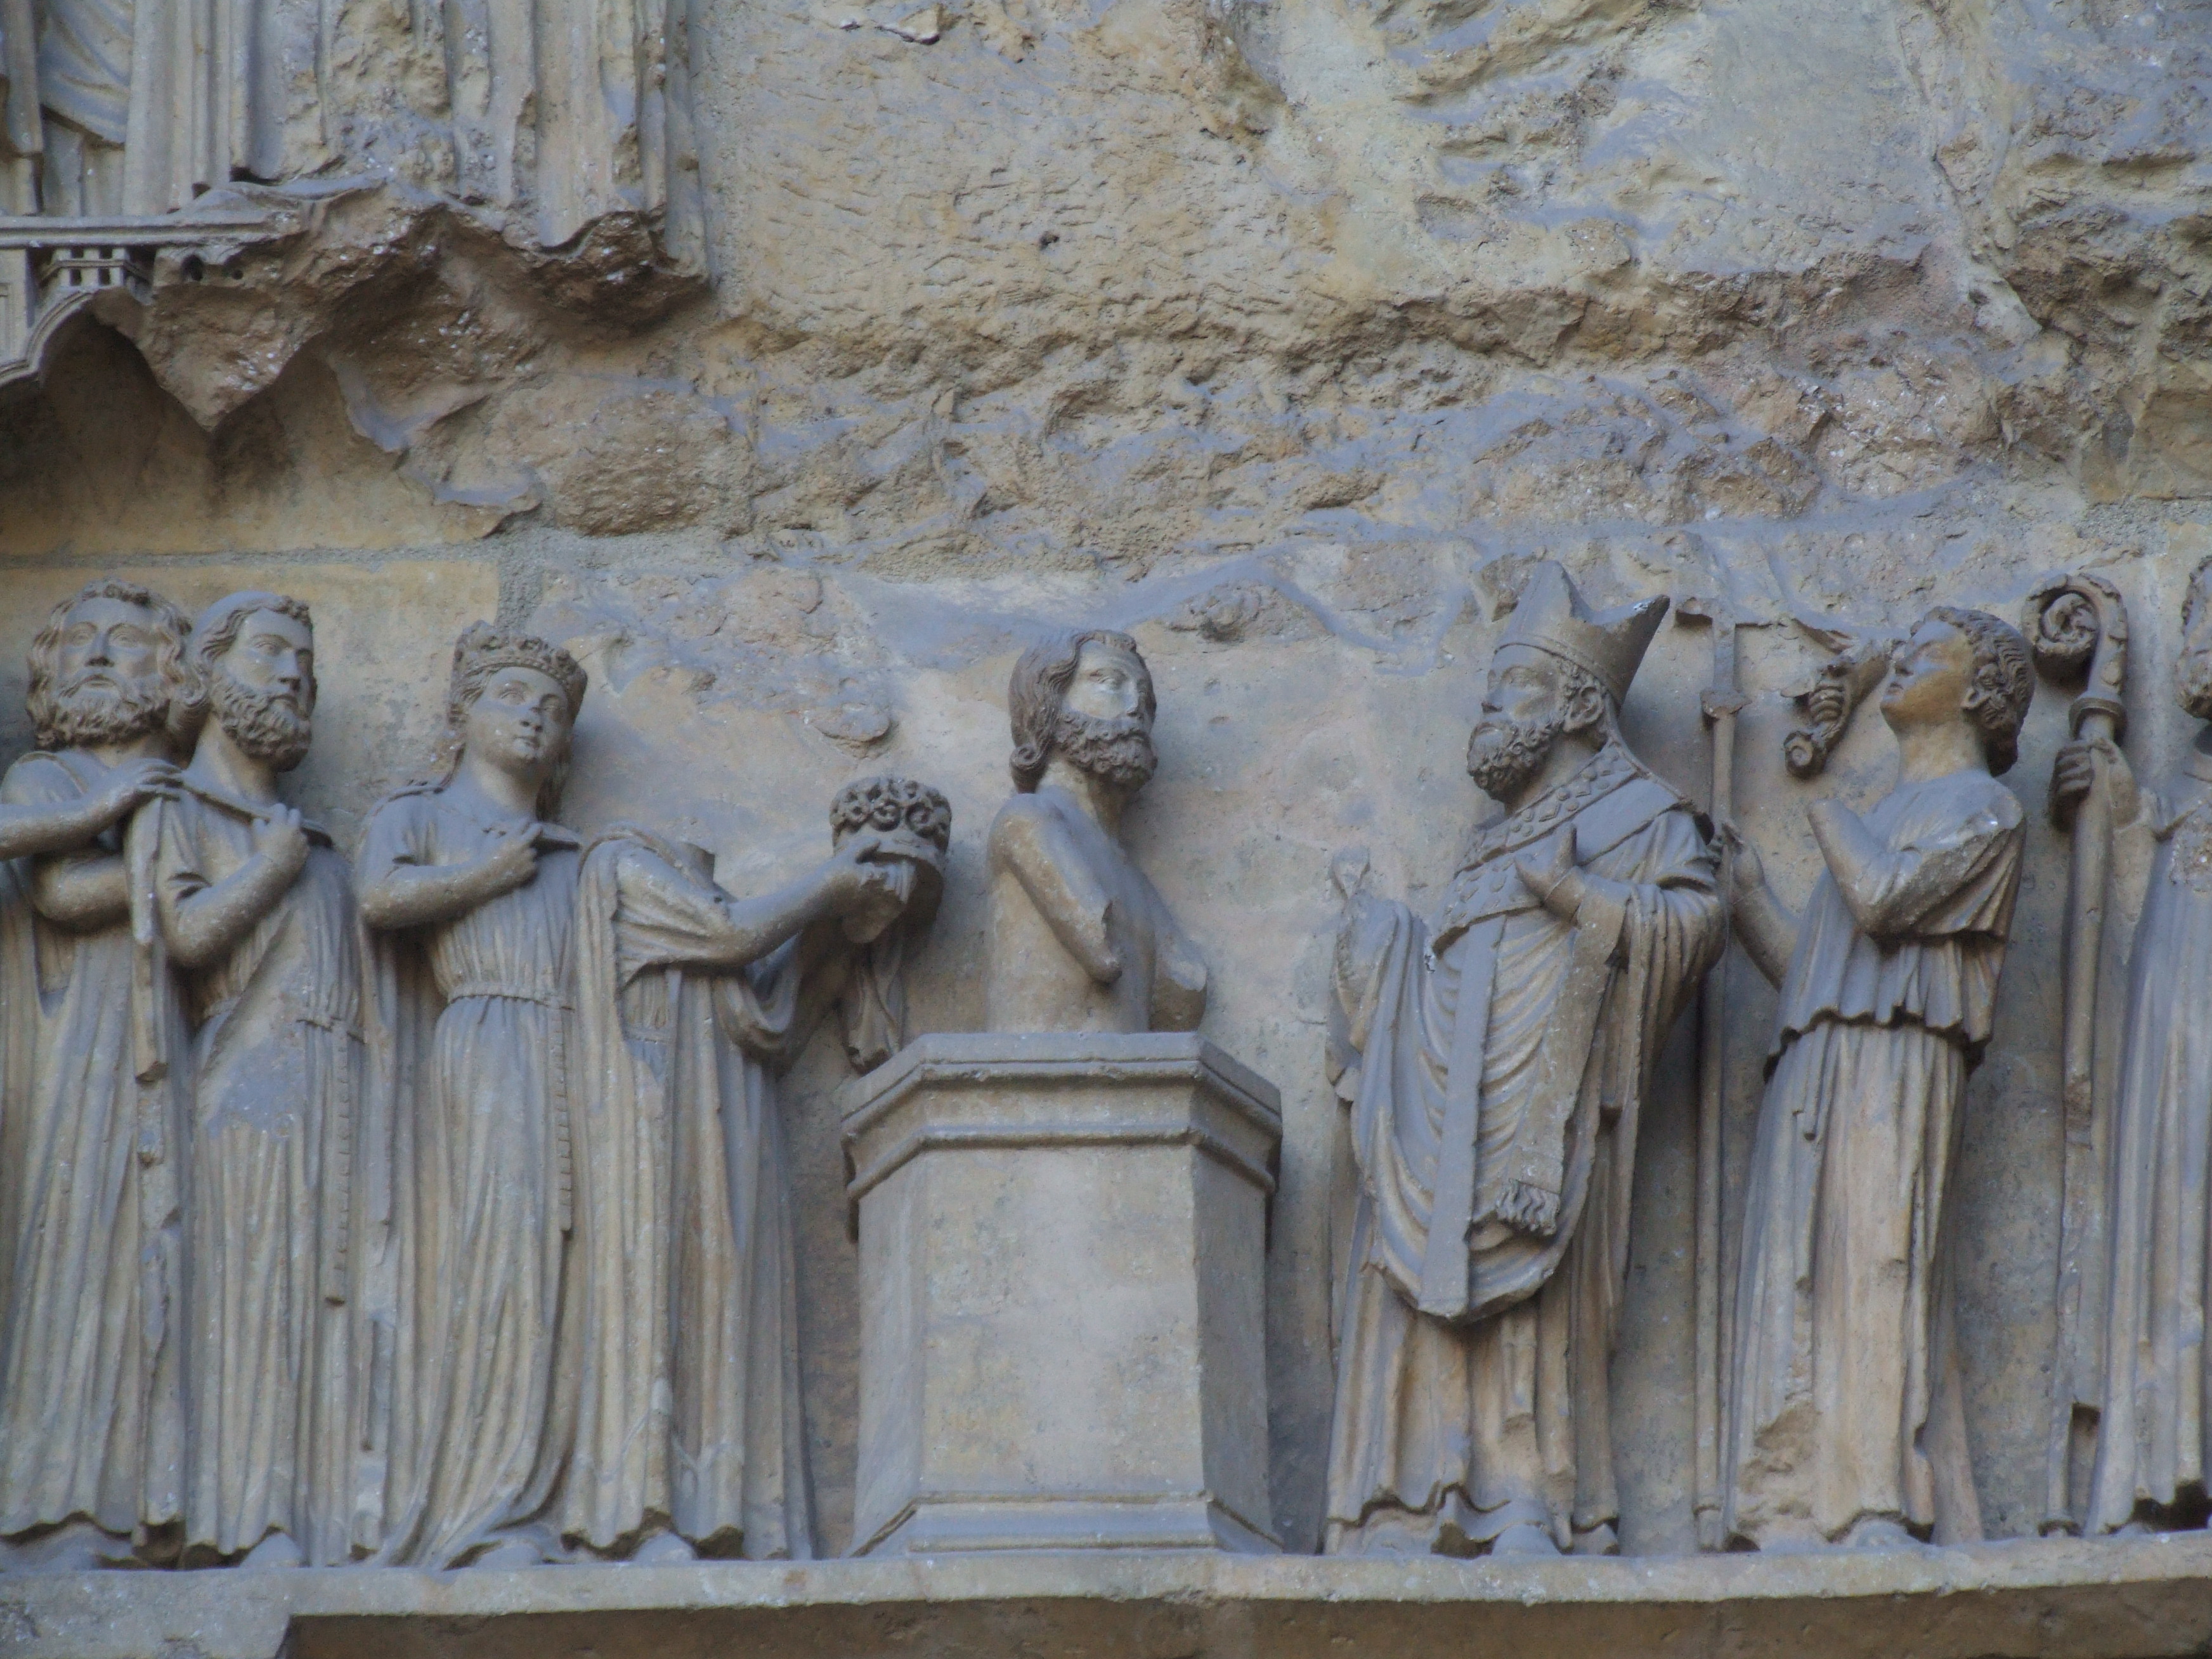 https://upload.wikimedia.org/wikipedia/commons/a/a5/Reims_Cathedrale_Notre_Dame_010_clovis_baptism.JPG